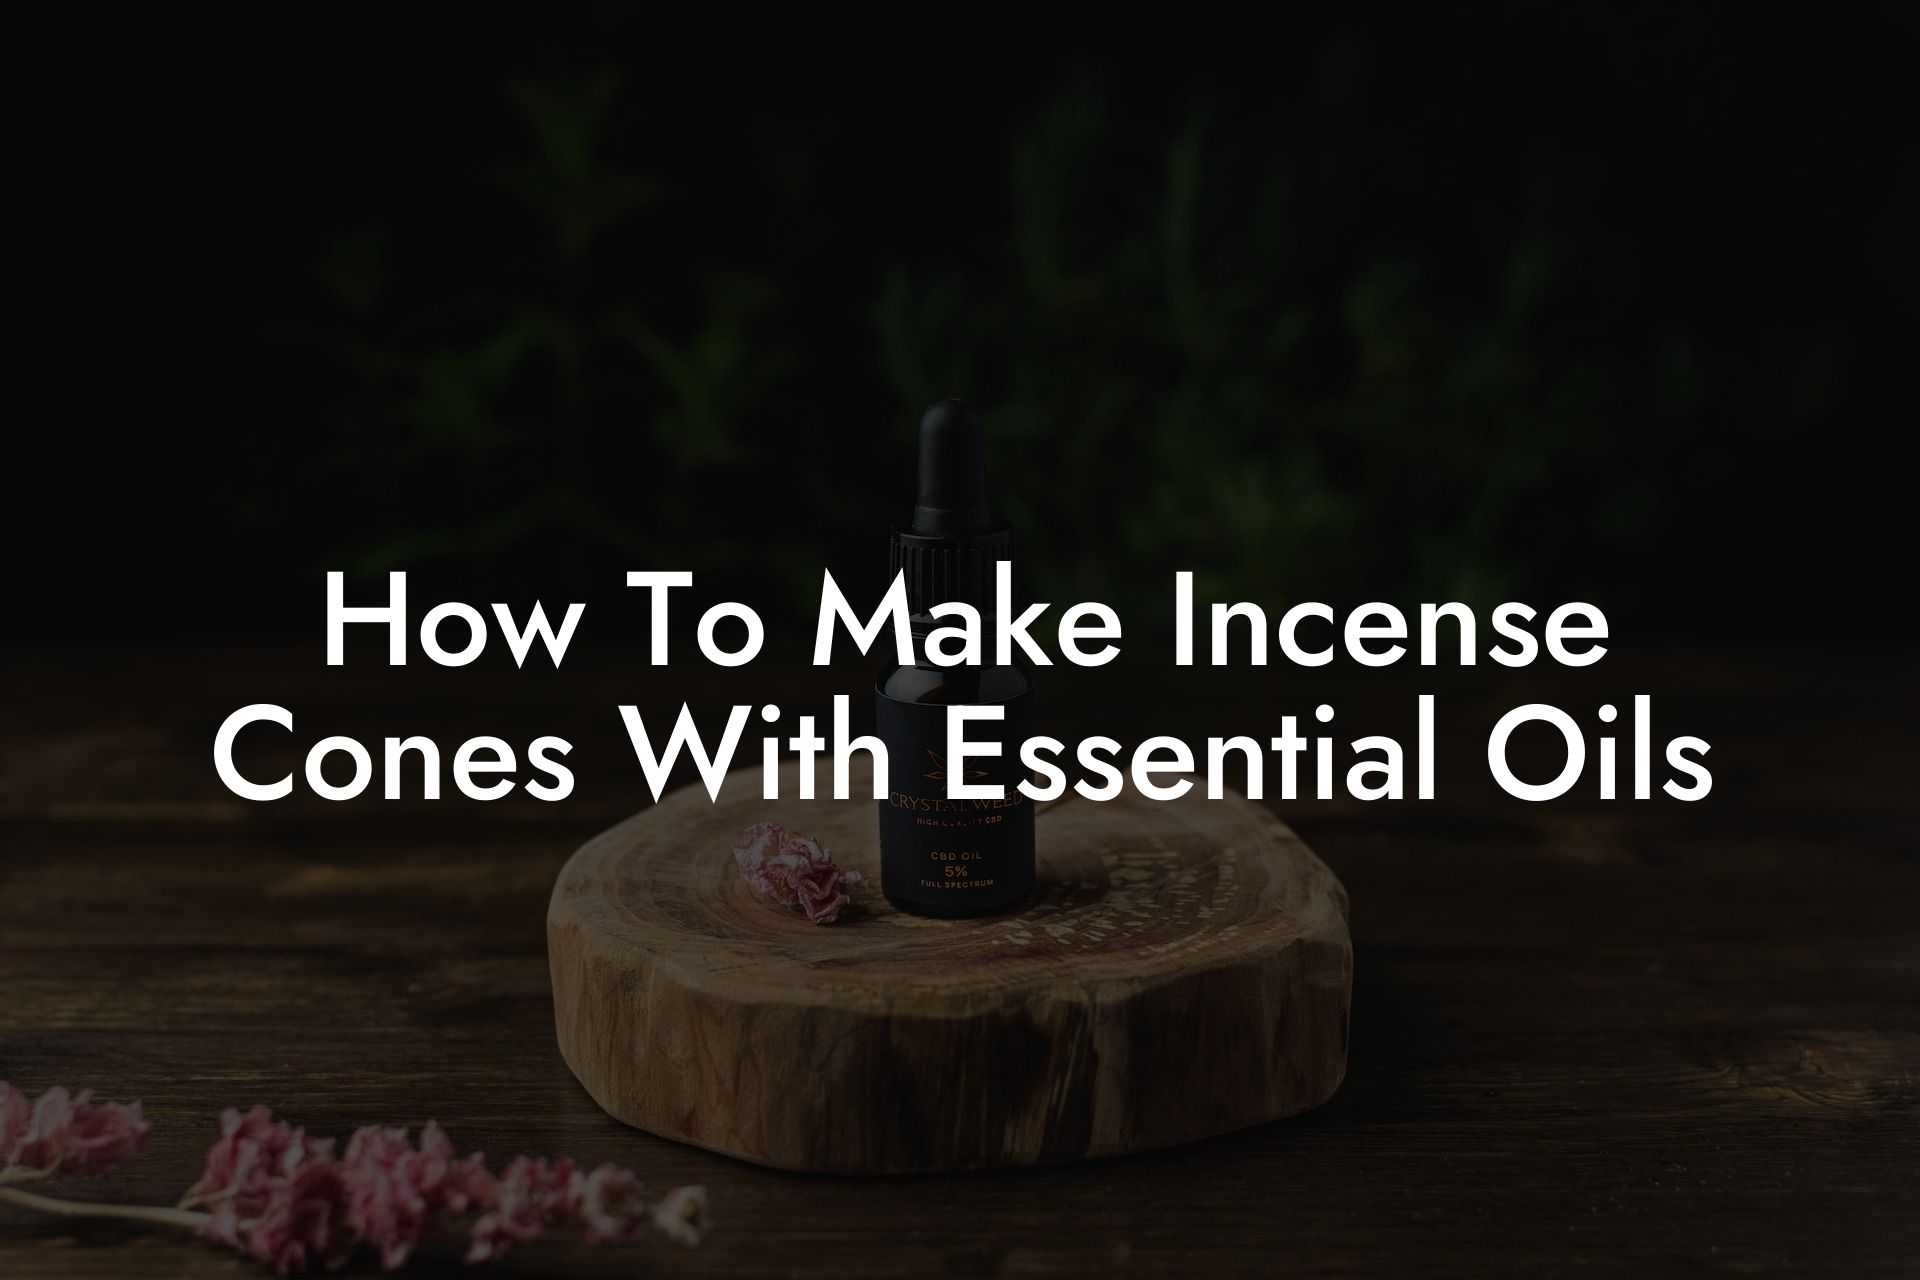 How To Make Incense Cones With Essential Oils